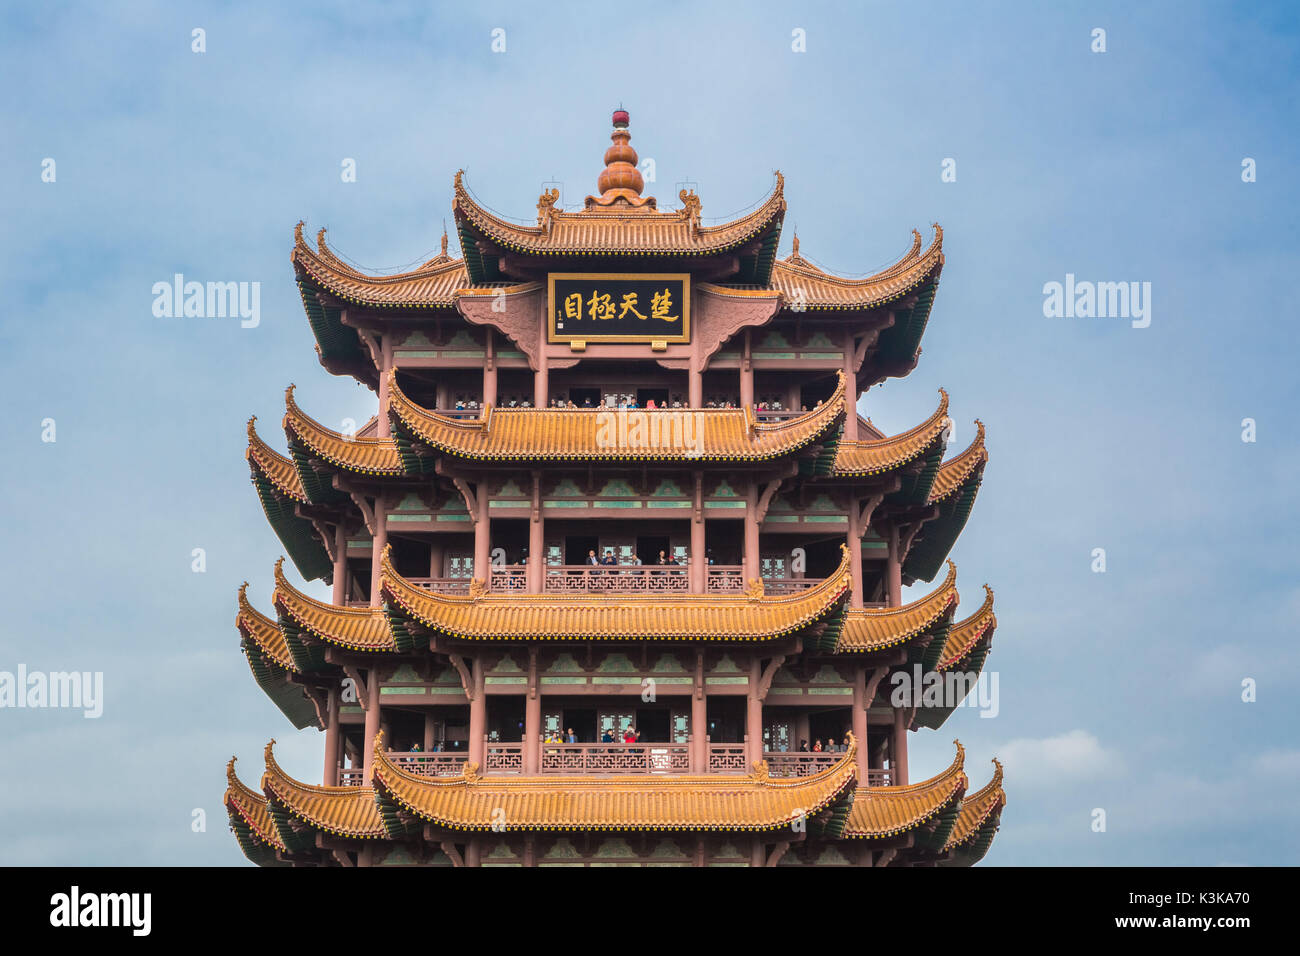 La Chine, Wuhan, Yellow Crane Tower Banque D'Images